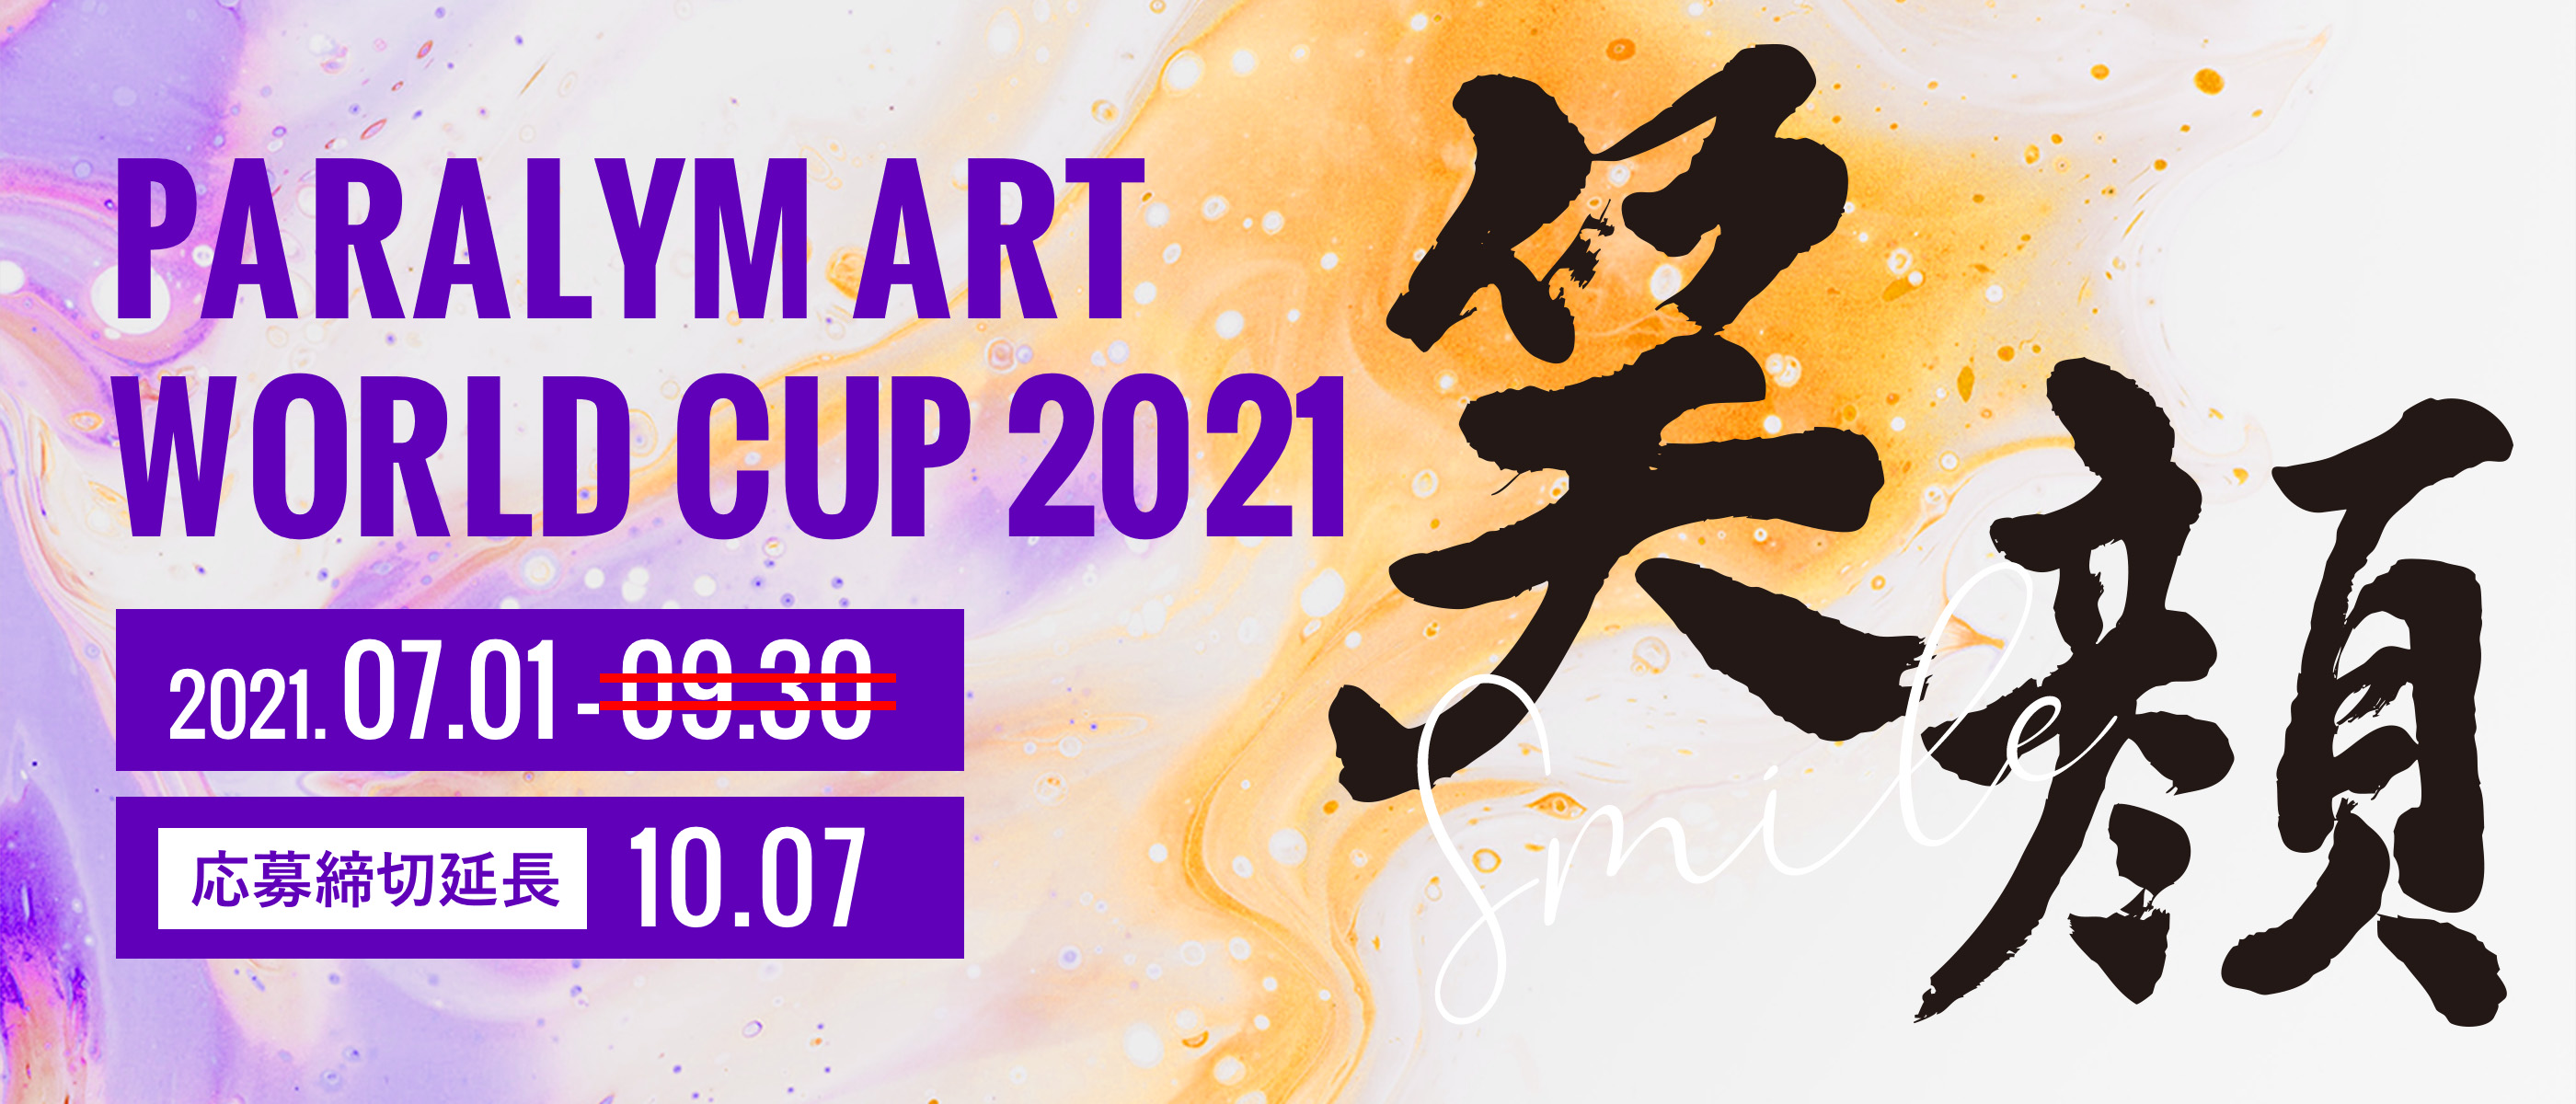 PARALYM ART WORLD CUP 2021 2021. 07.01 - 09.30 笑顔 応募締め切り延長 10.07